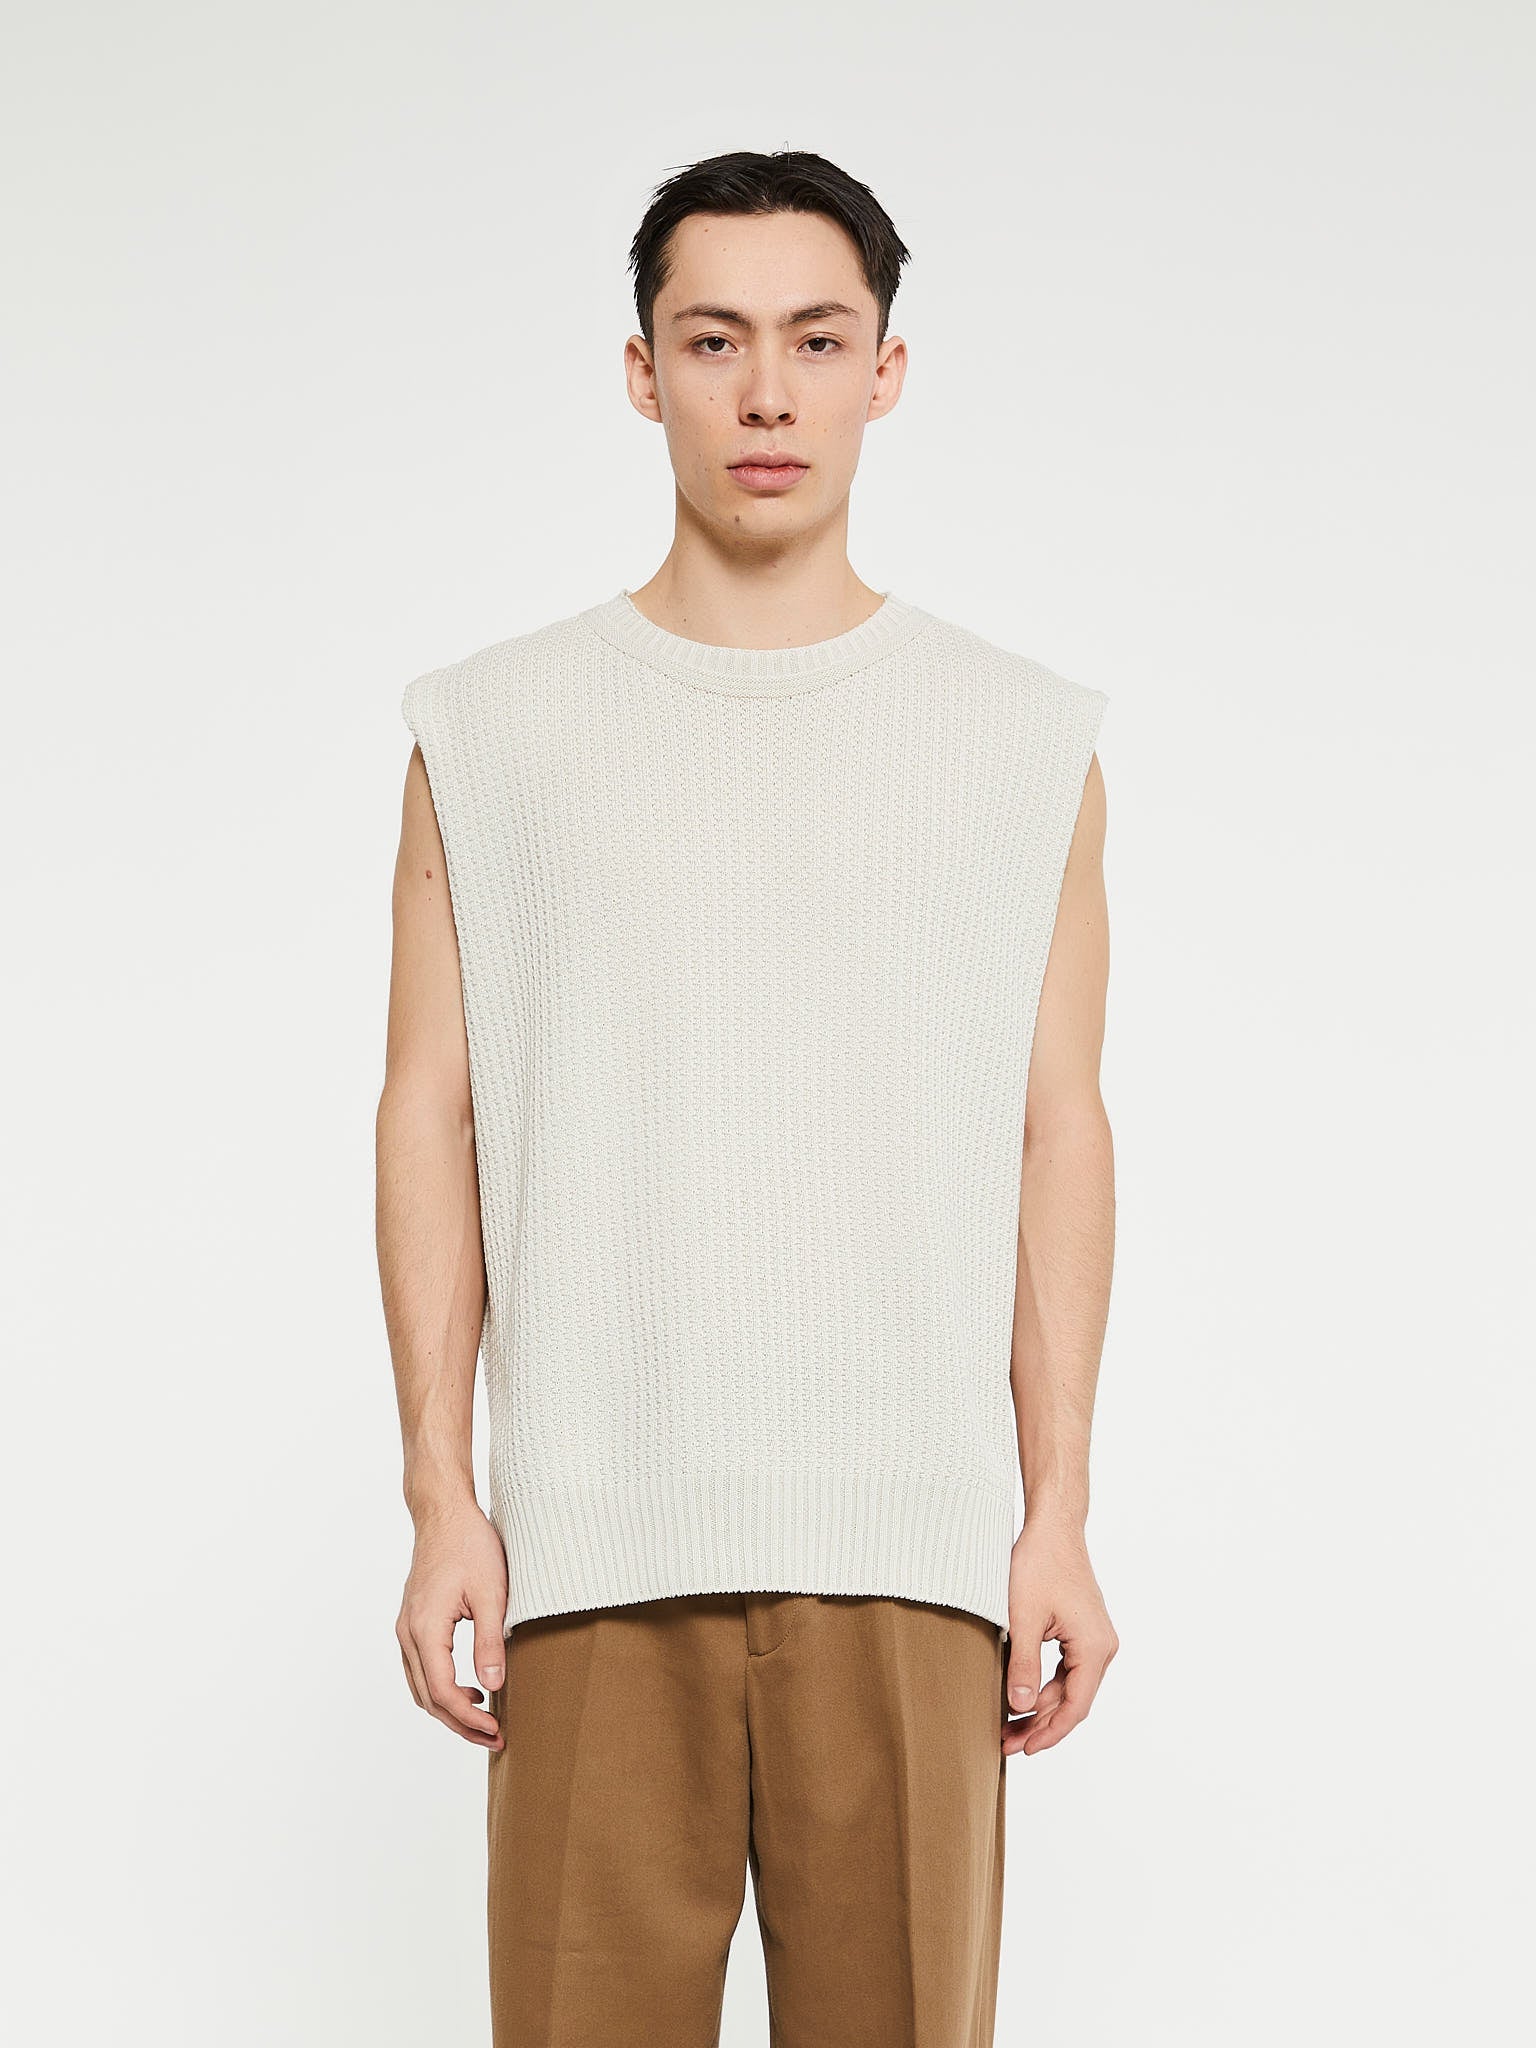 Homme Plissé Issey Miyake -Common Knit in White